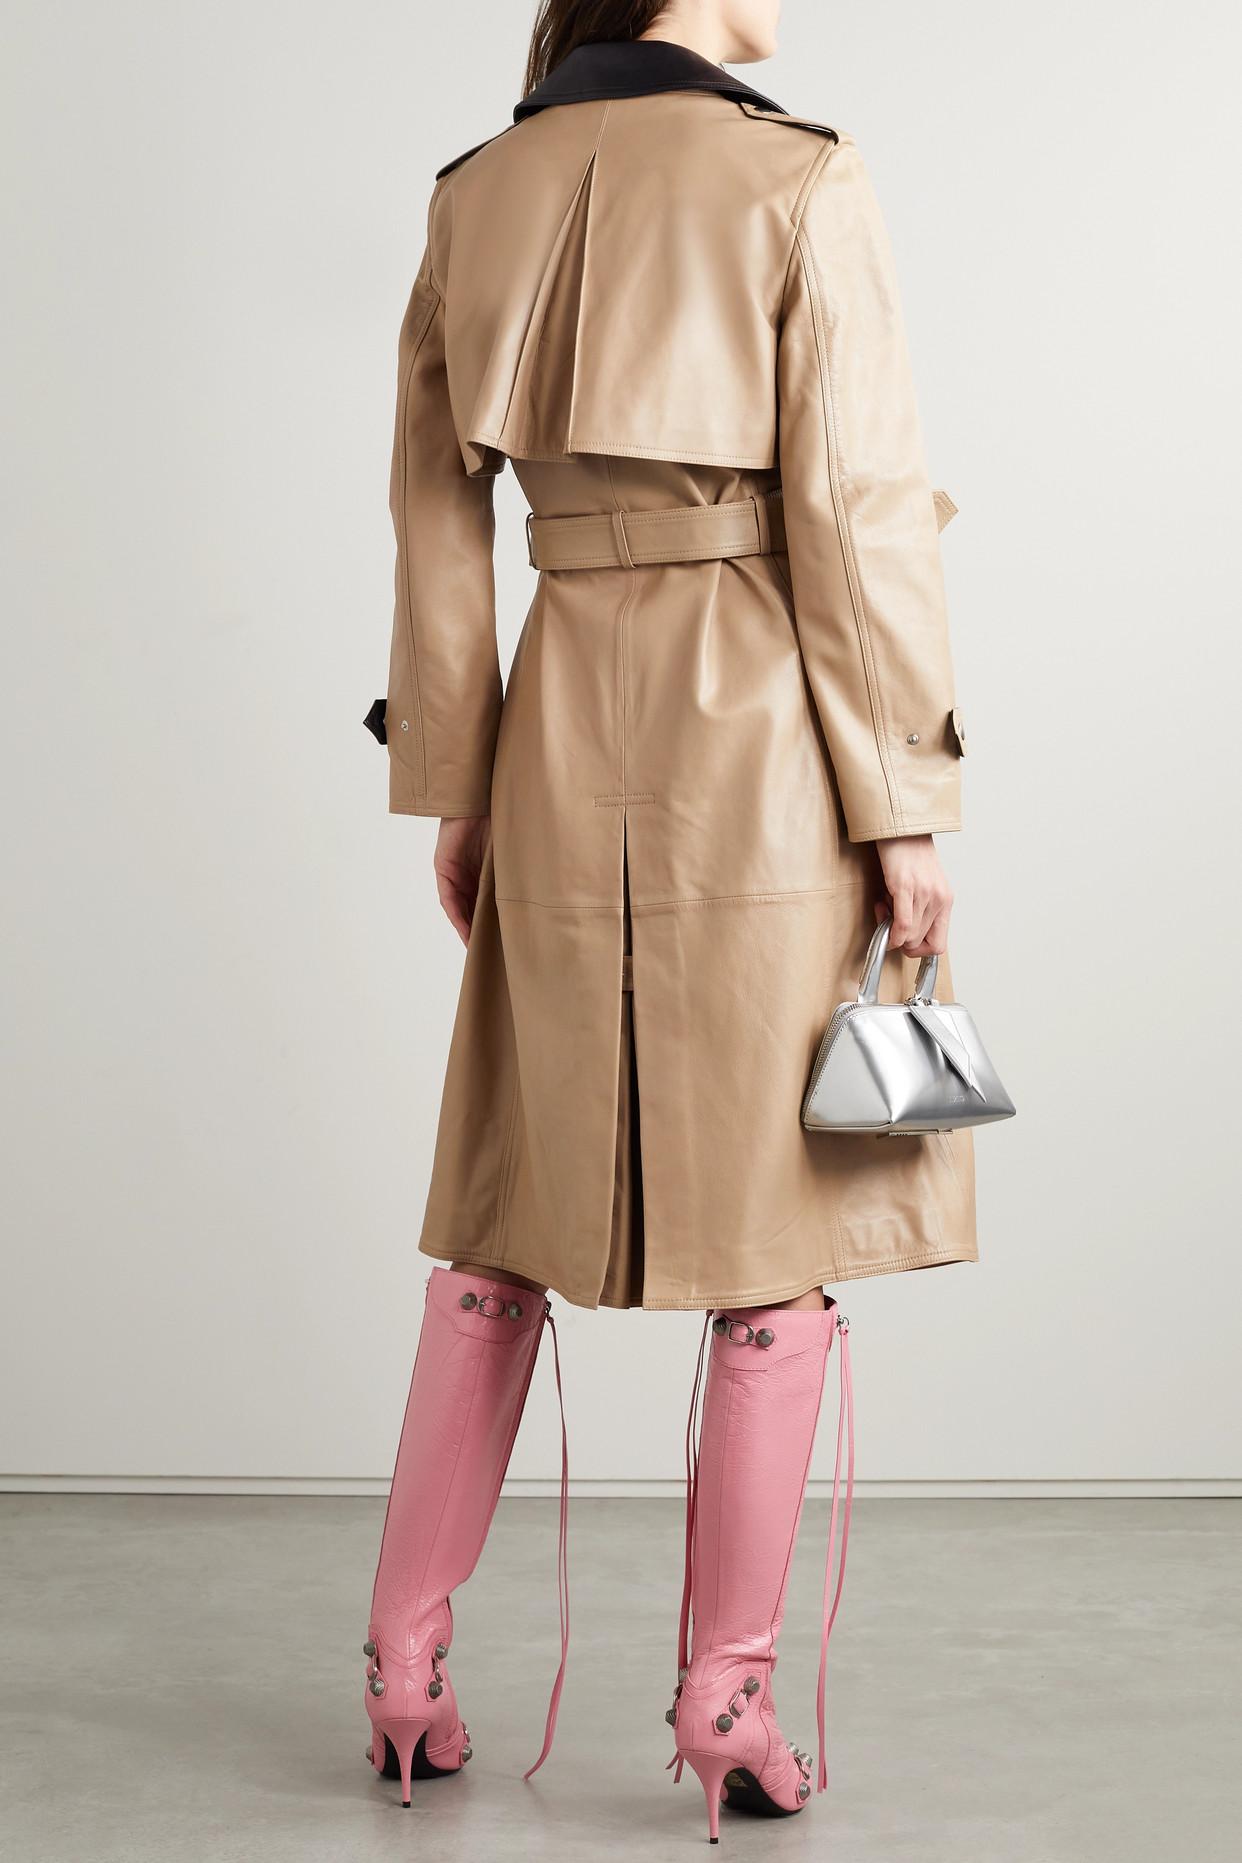 Helmut Lang Belted Layered Two-tone Leather Trench Coat in Natural | Lyst